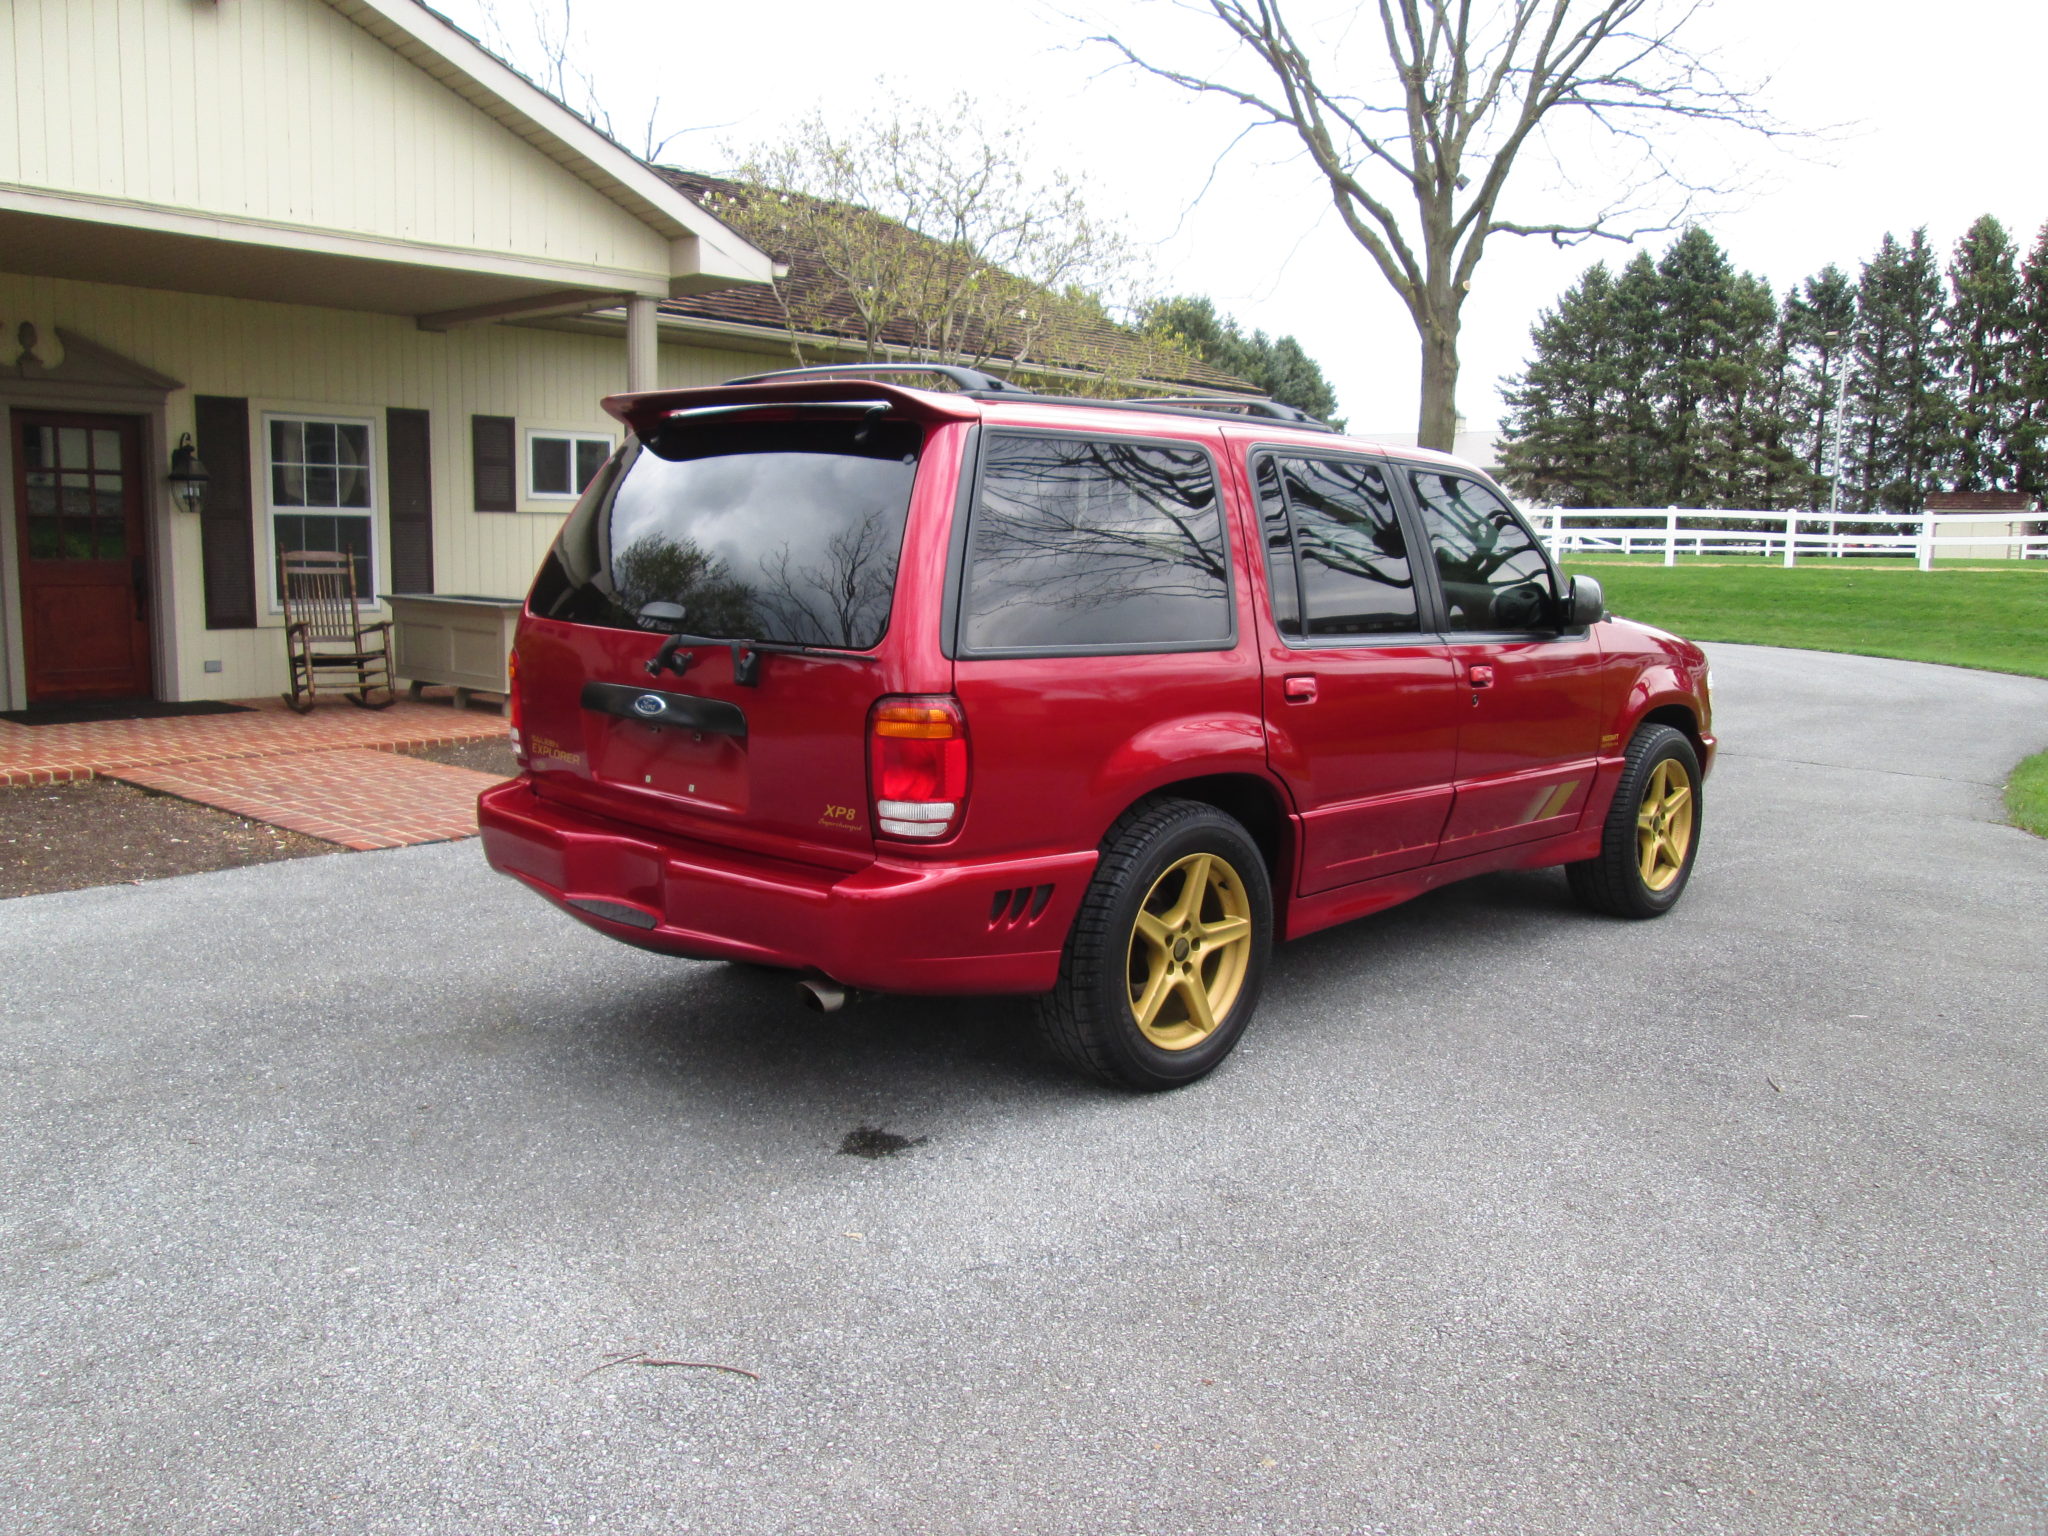 This 1998 Saleen Xp8 Ford Explorer For Sale Is One Of 300 Produced